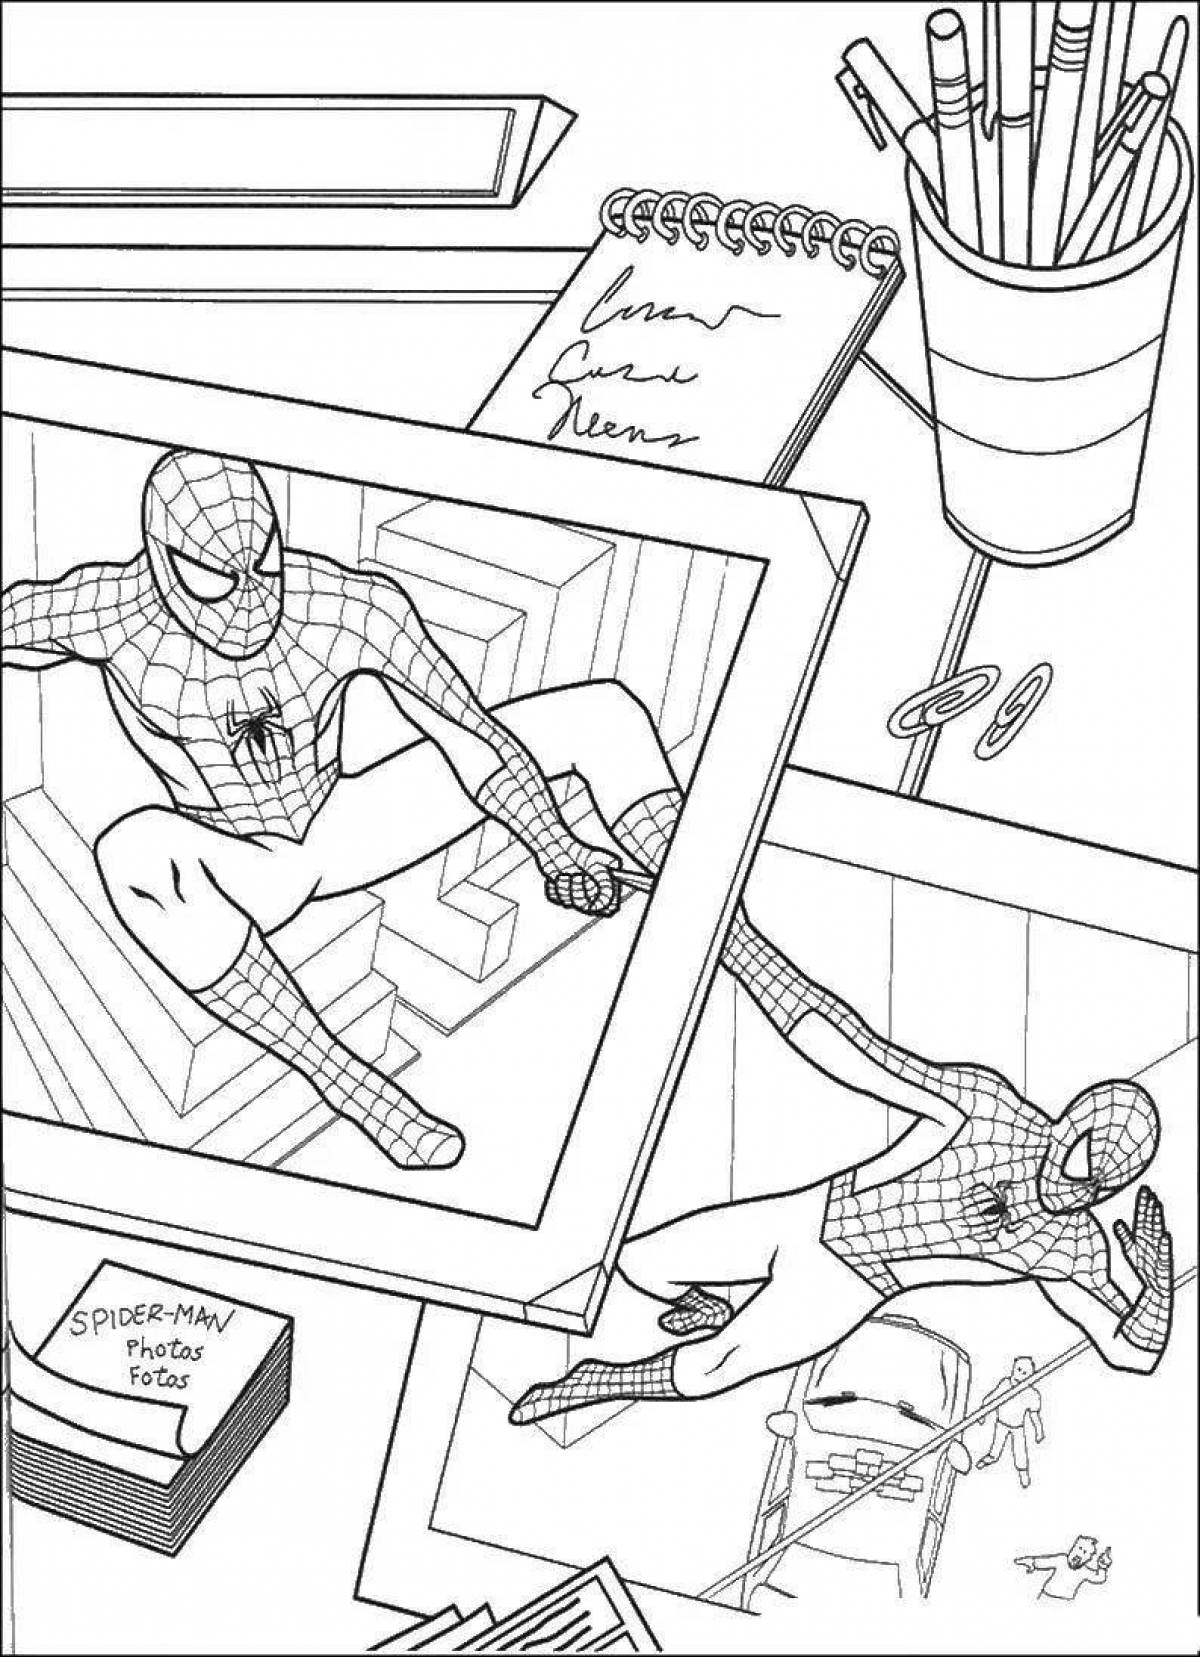 Exciting coloring spiderman peter parker